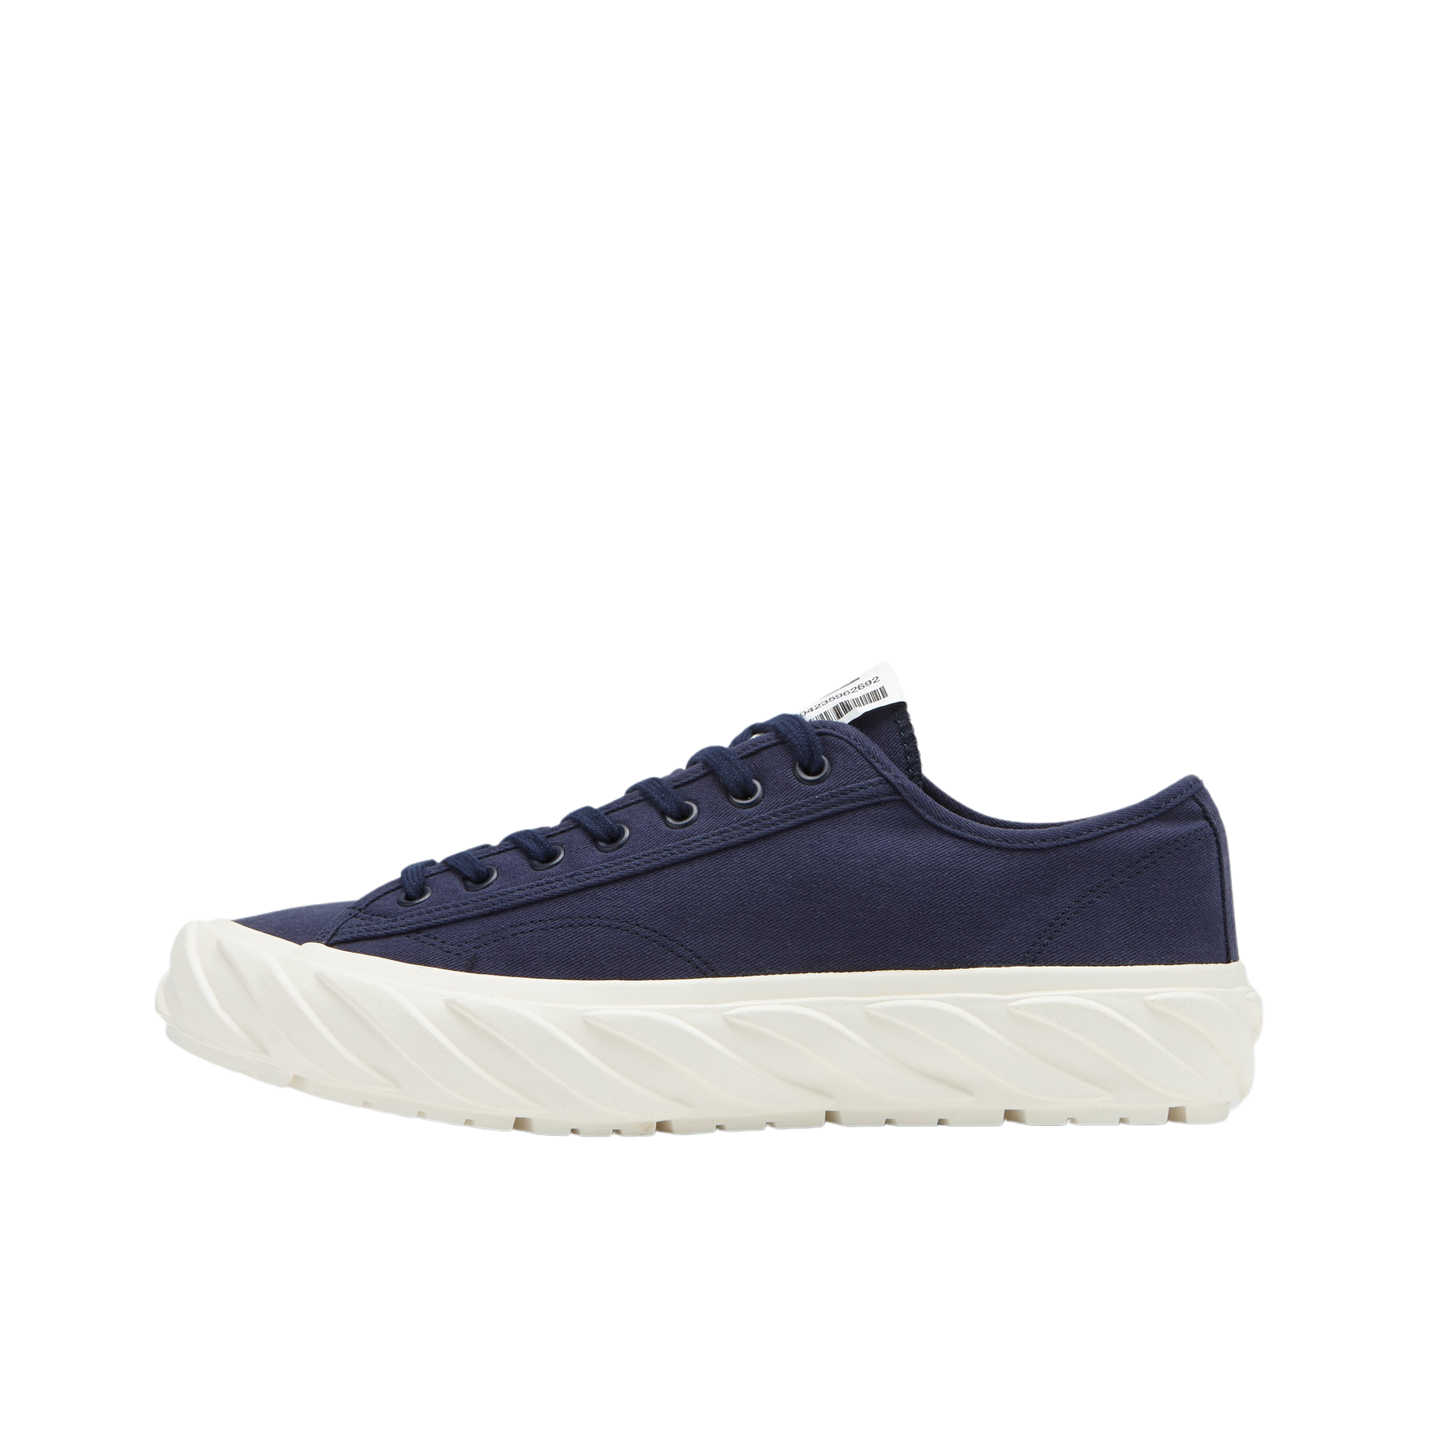 AGE SNEAKERS Cut Camouflage Navy